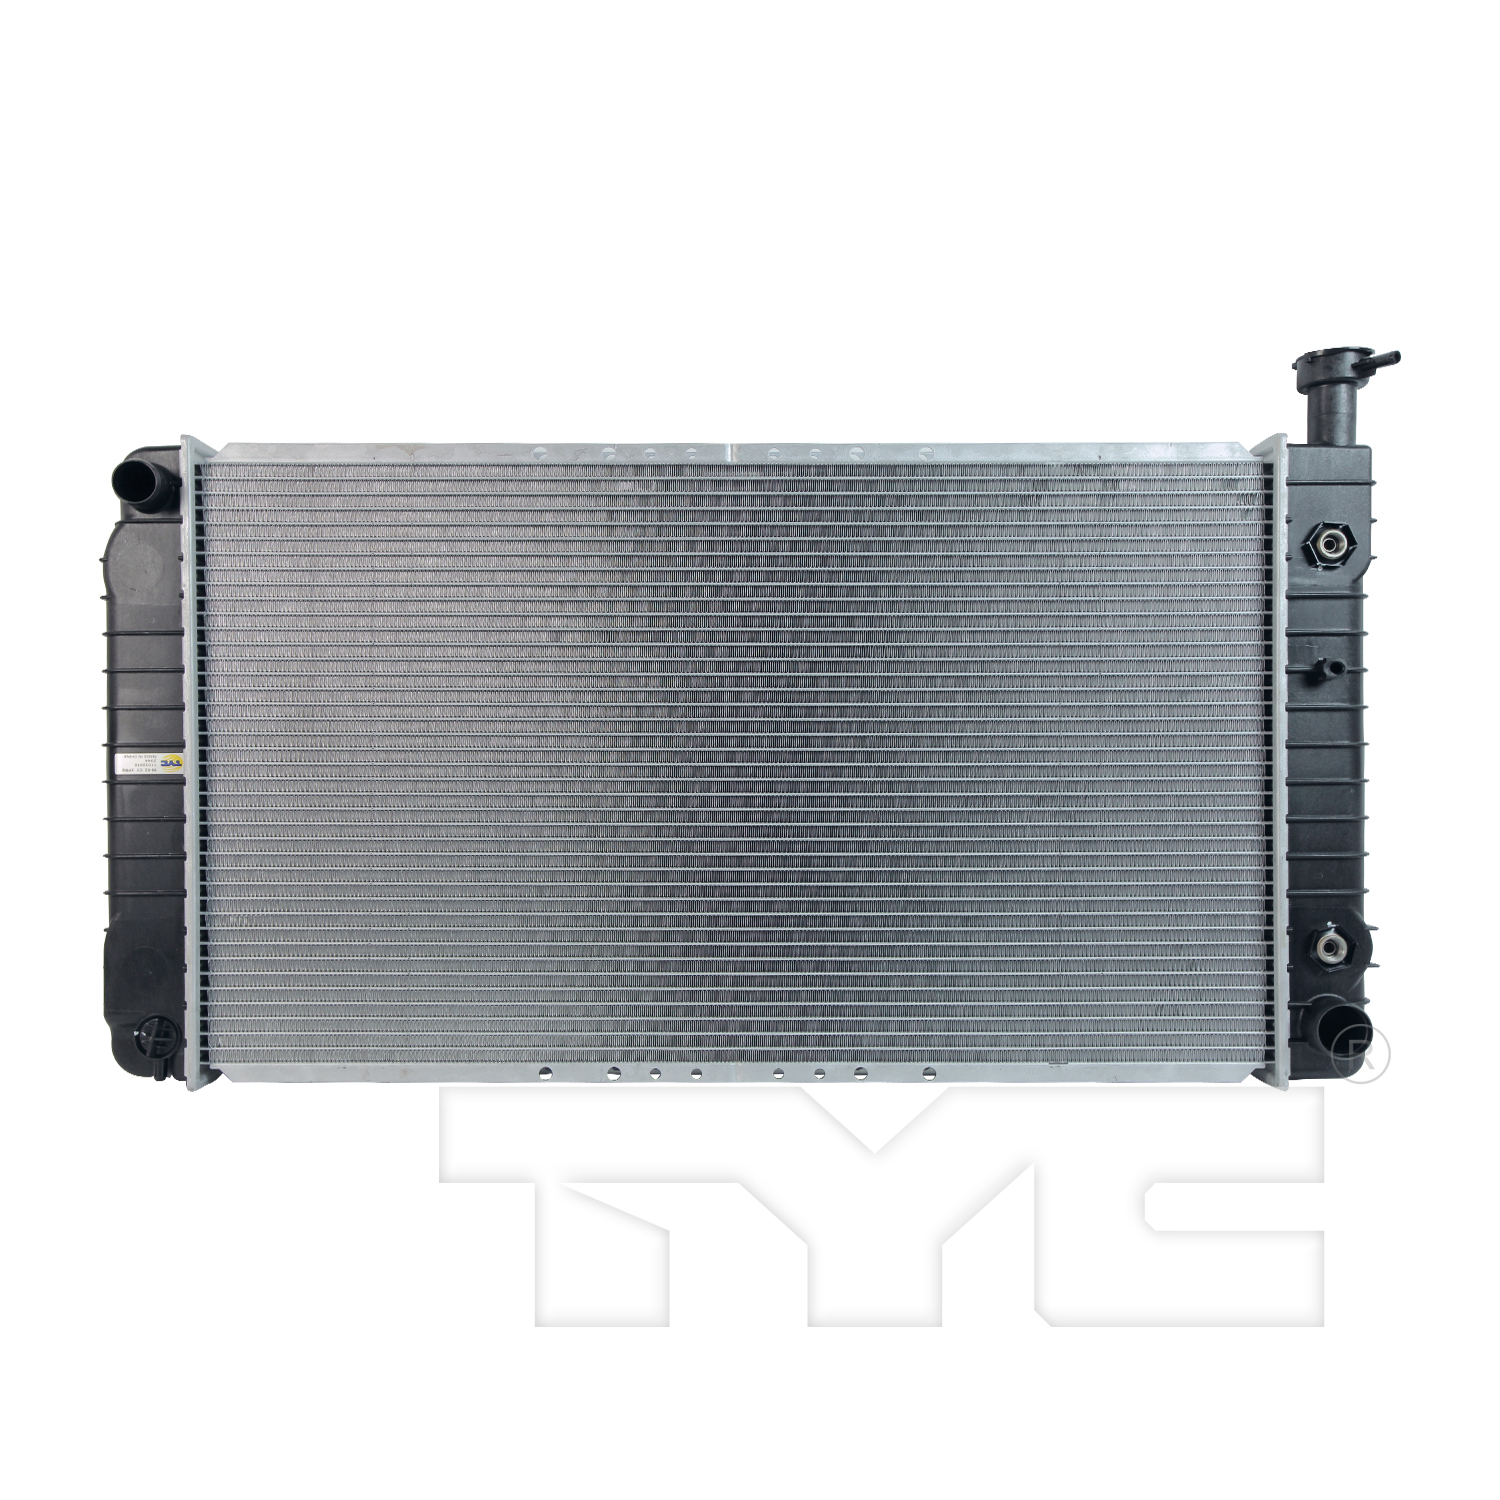 Aftermarket RADIATORS for CHEVROLET - EXPRESS 3500, EXPRESS 3500,96-96,Radiator assembly